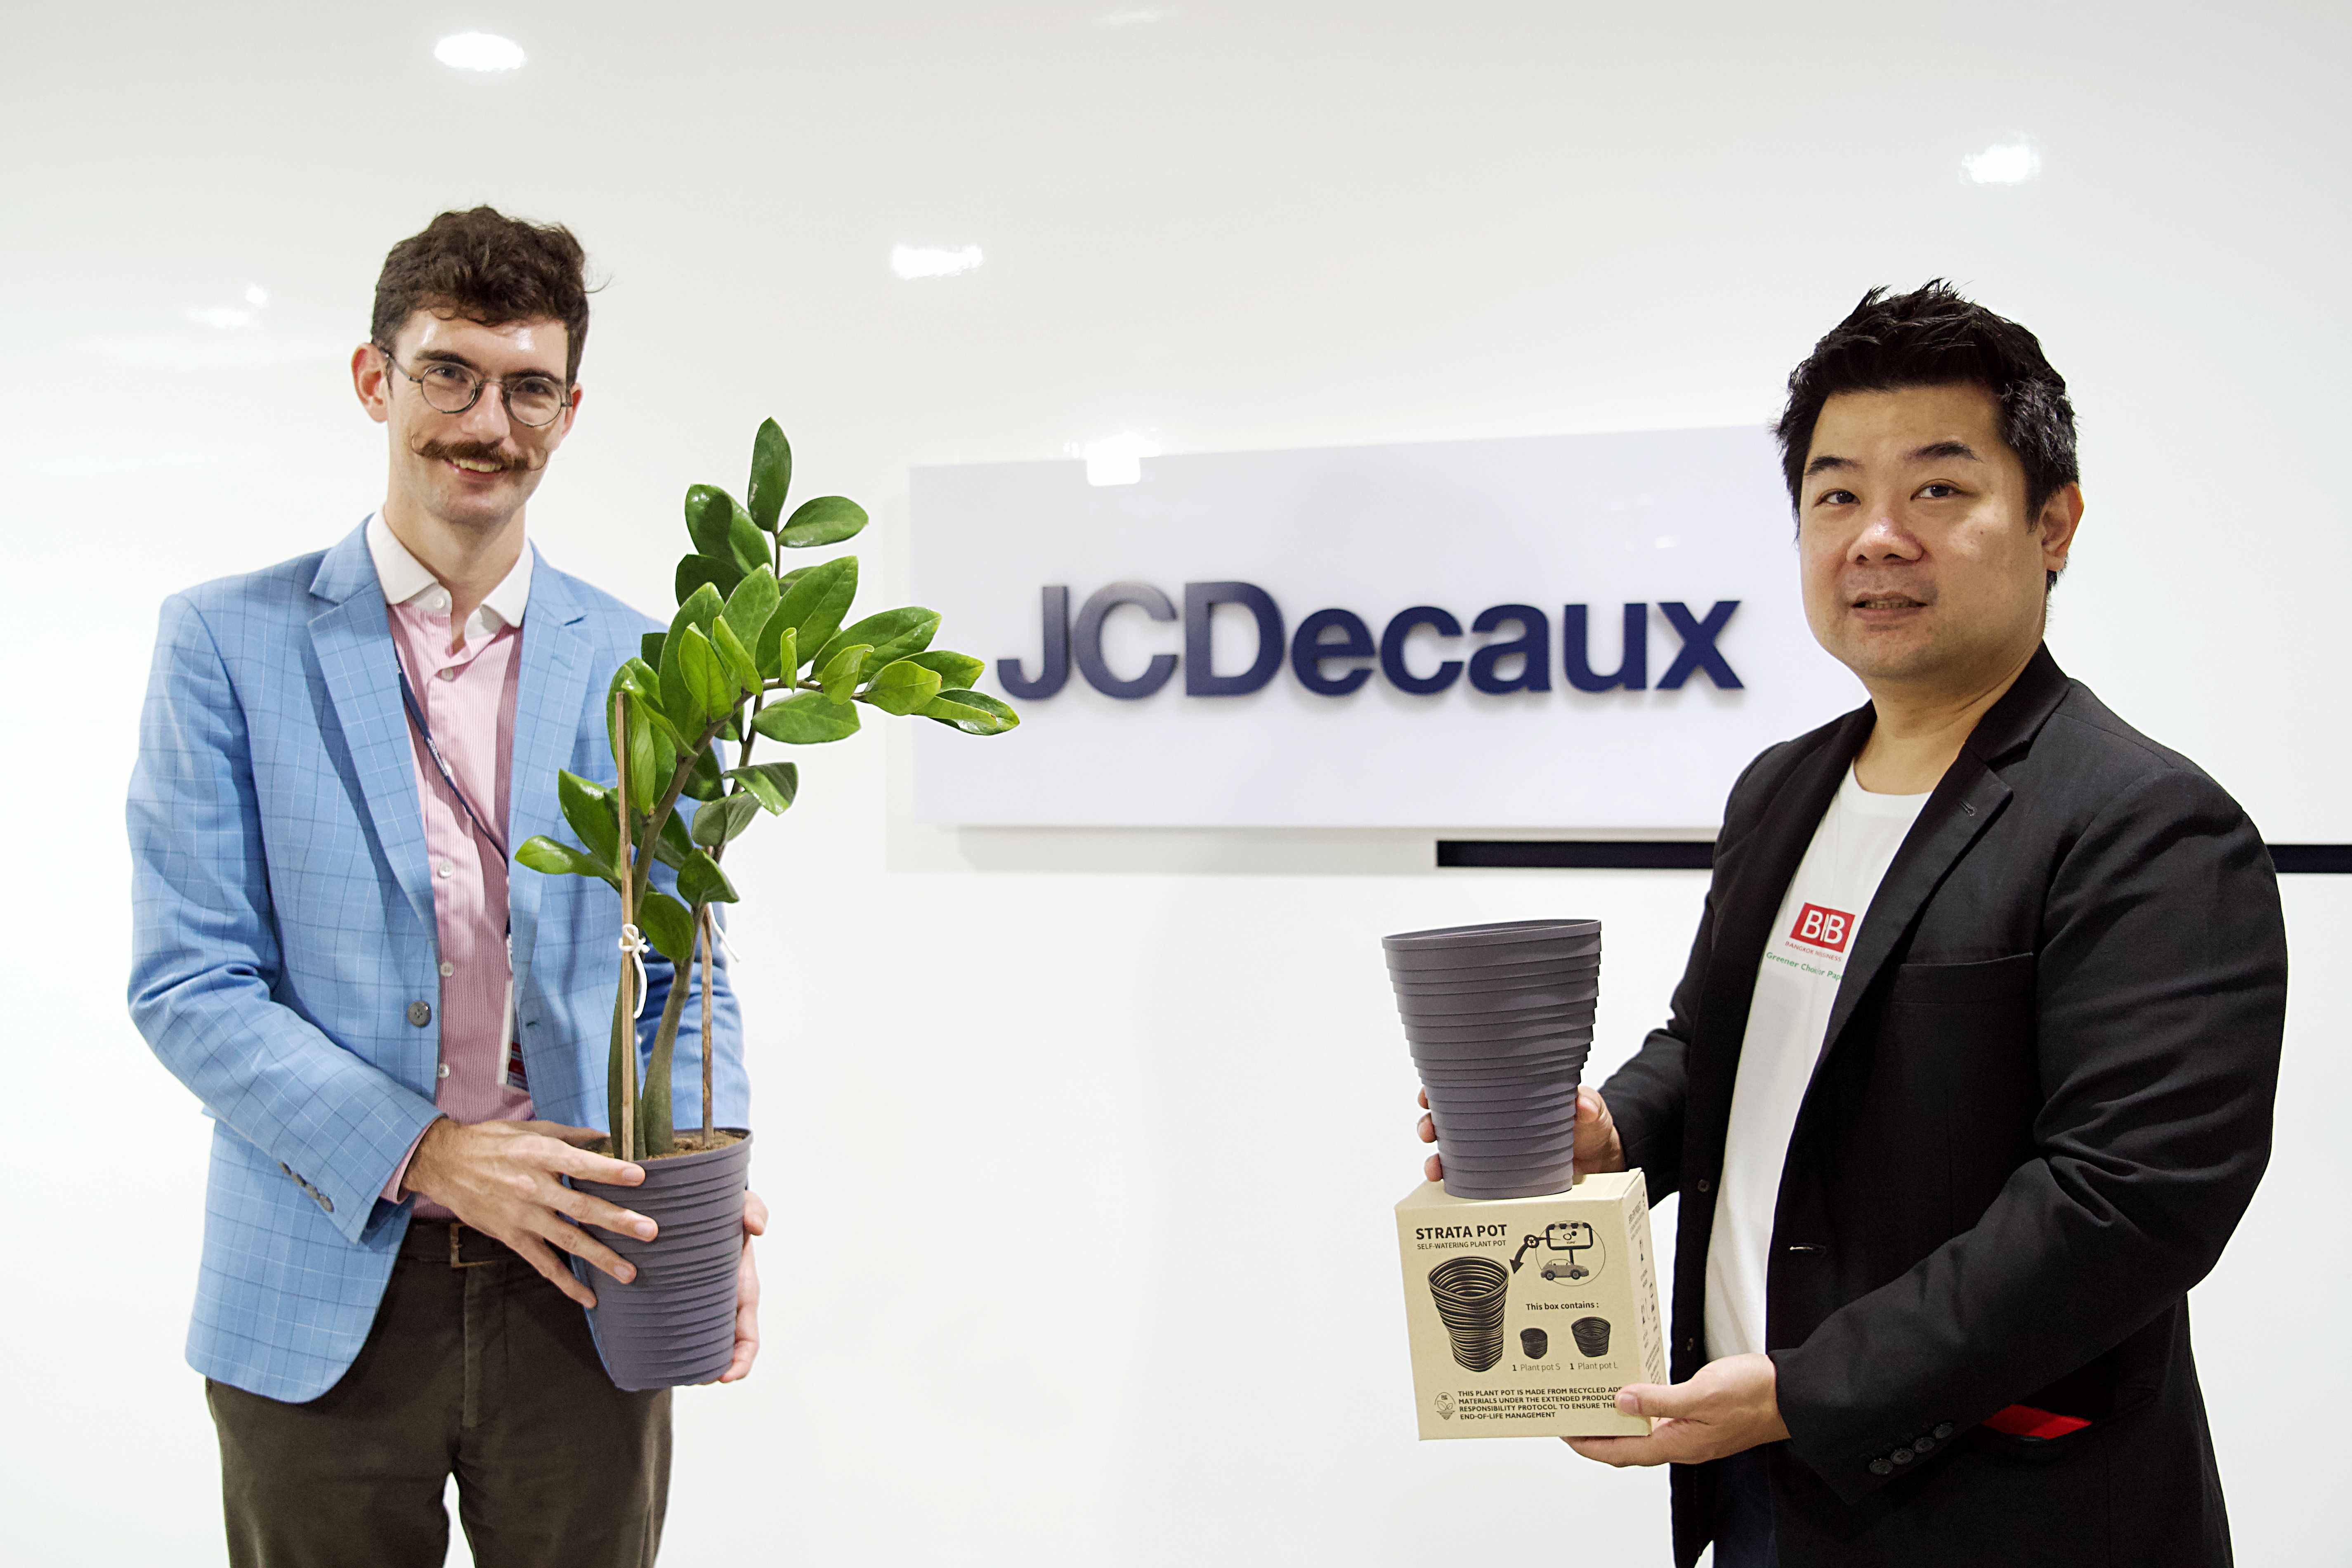 English News - BPB joins forces with JCDecaux to promote sustainability!  Upcycling 'used billboards' into 'flower pots' reducing waste by 100%